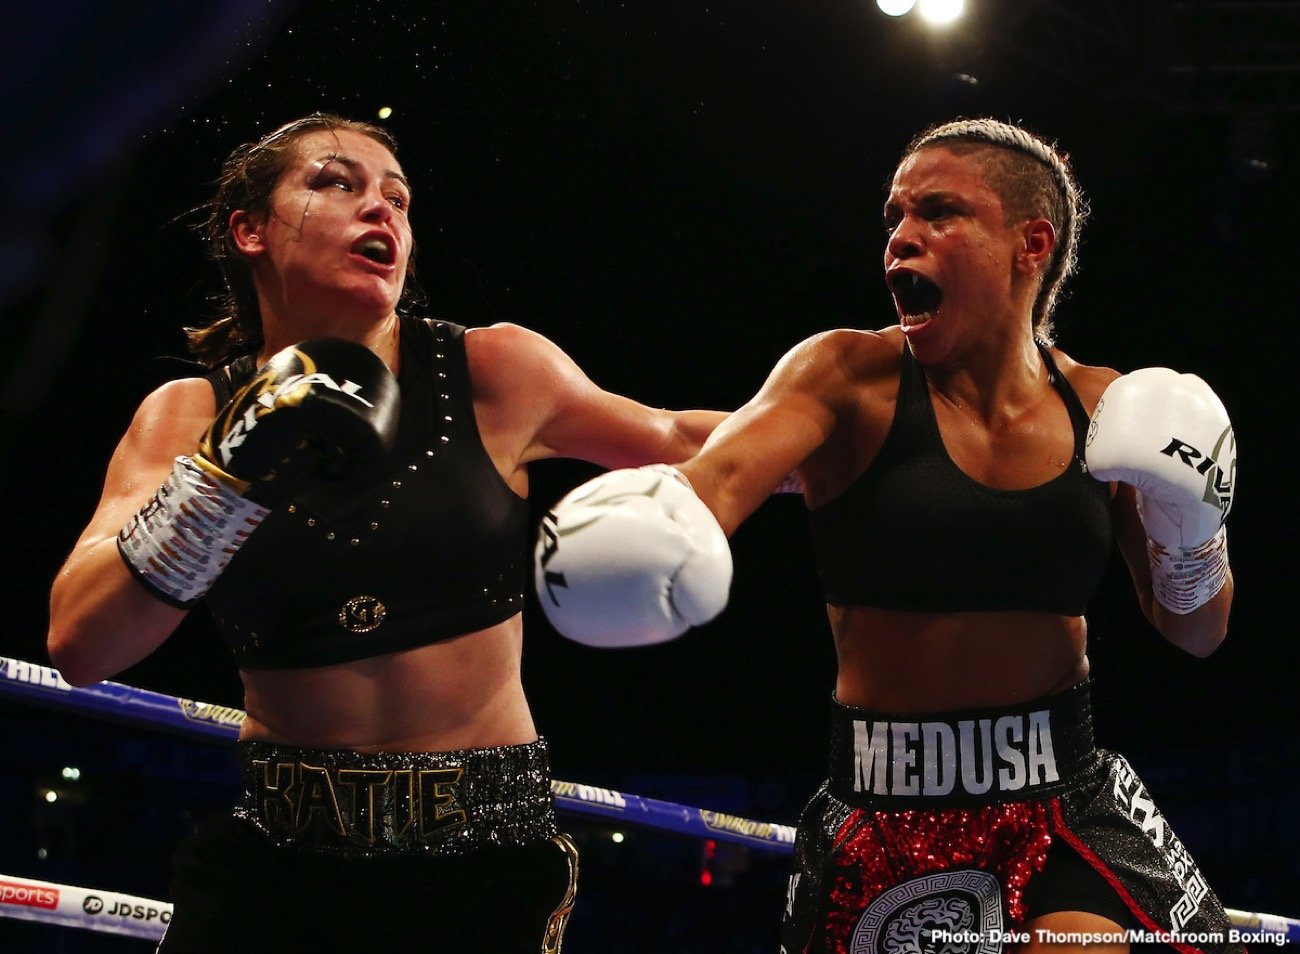 Image: Katie Taylor - Legacy, Future Opponents and Miriam Gutierrez